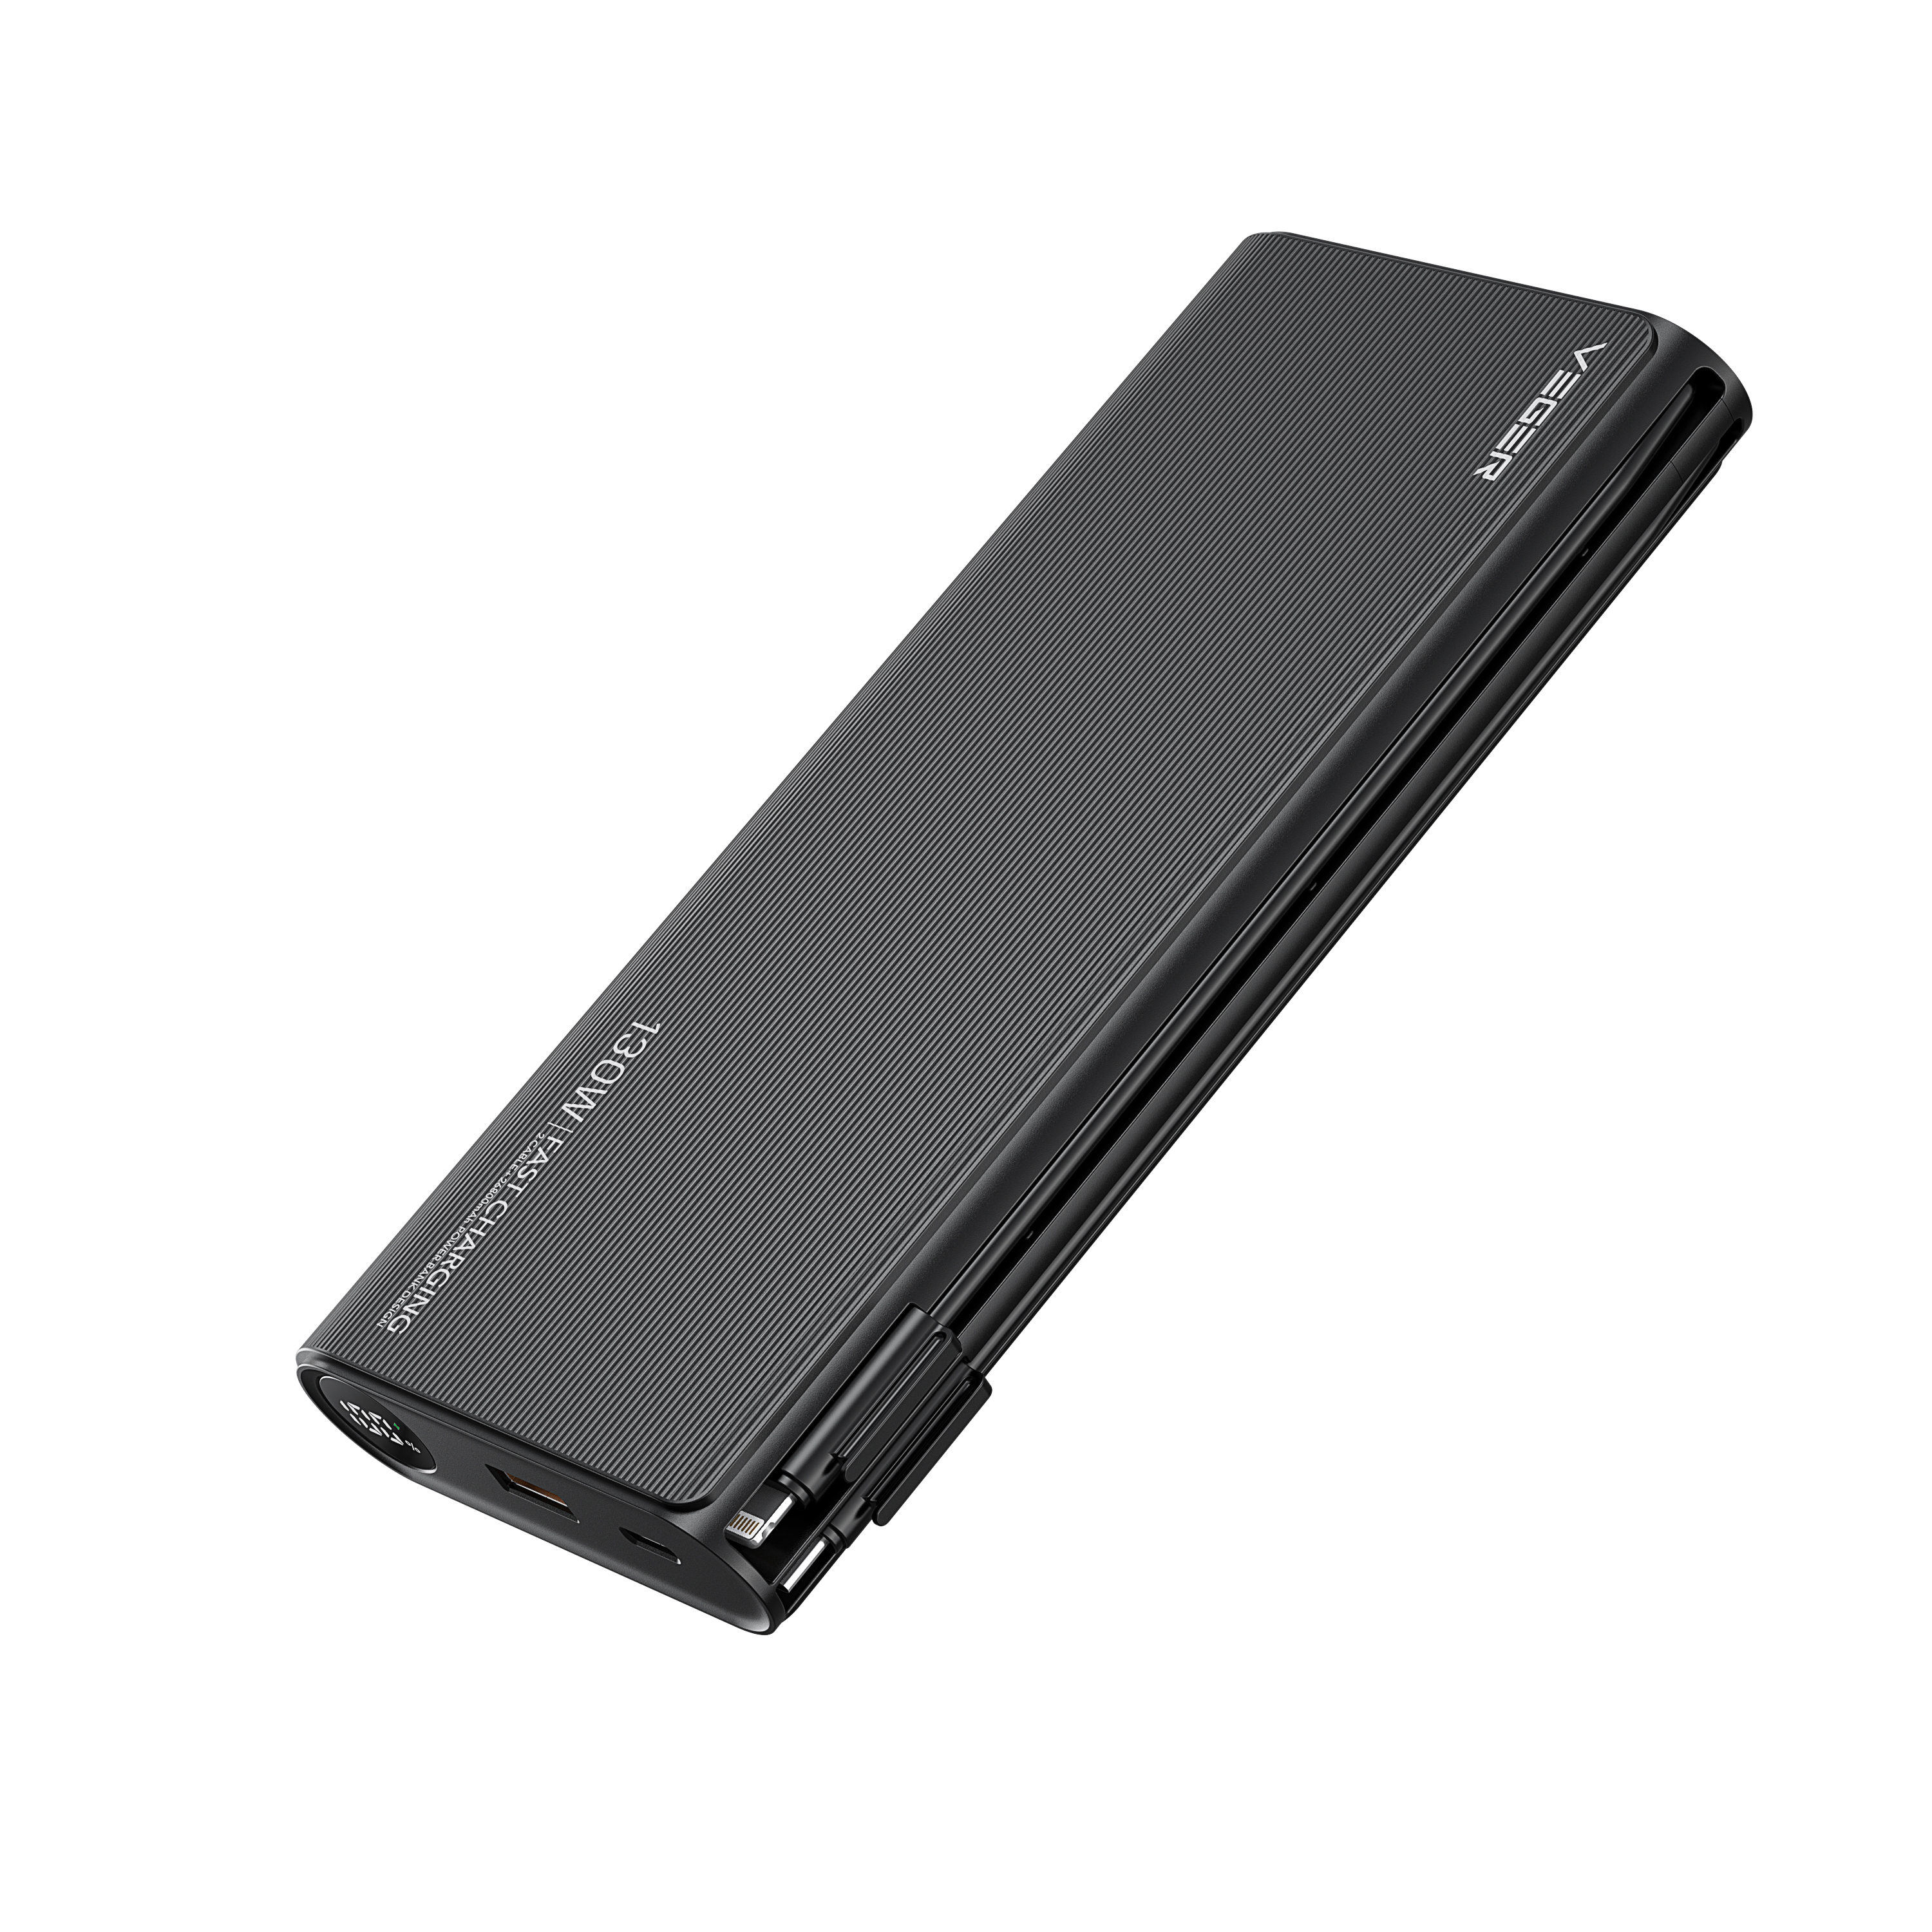 Veger TC130 Fast Charging PowerBank - 25.000 mAh - With Type-C & Lightning Cable Built-In - Black